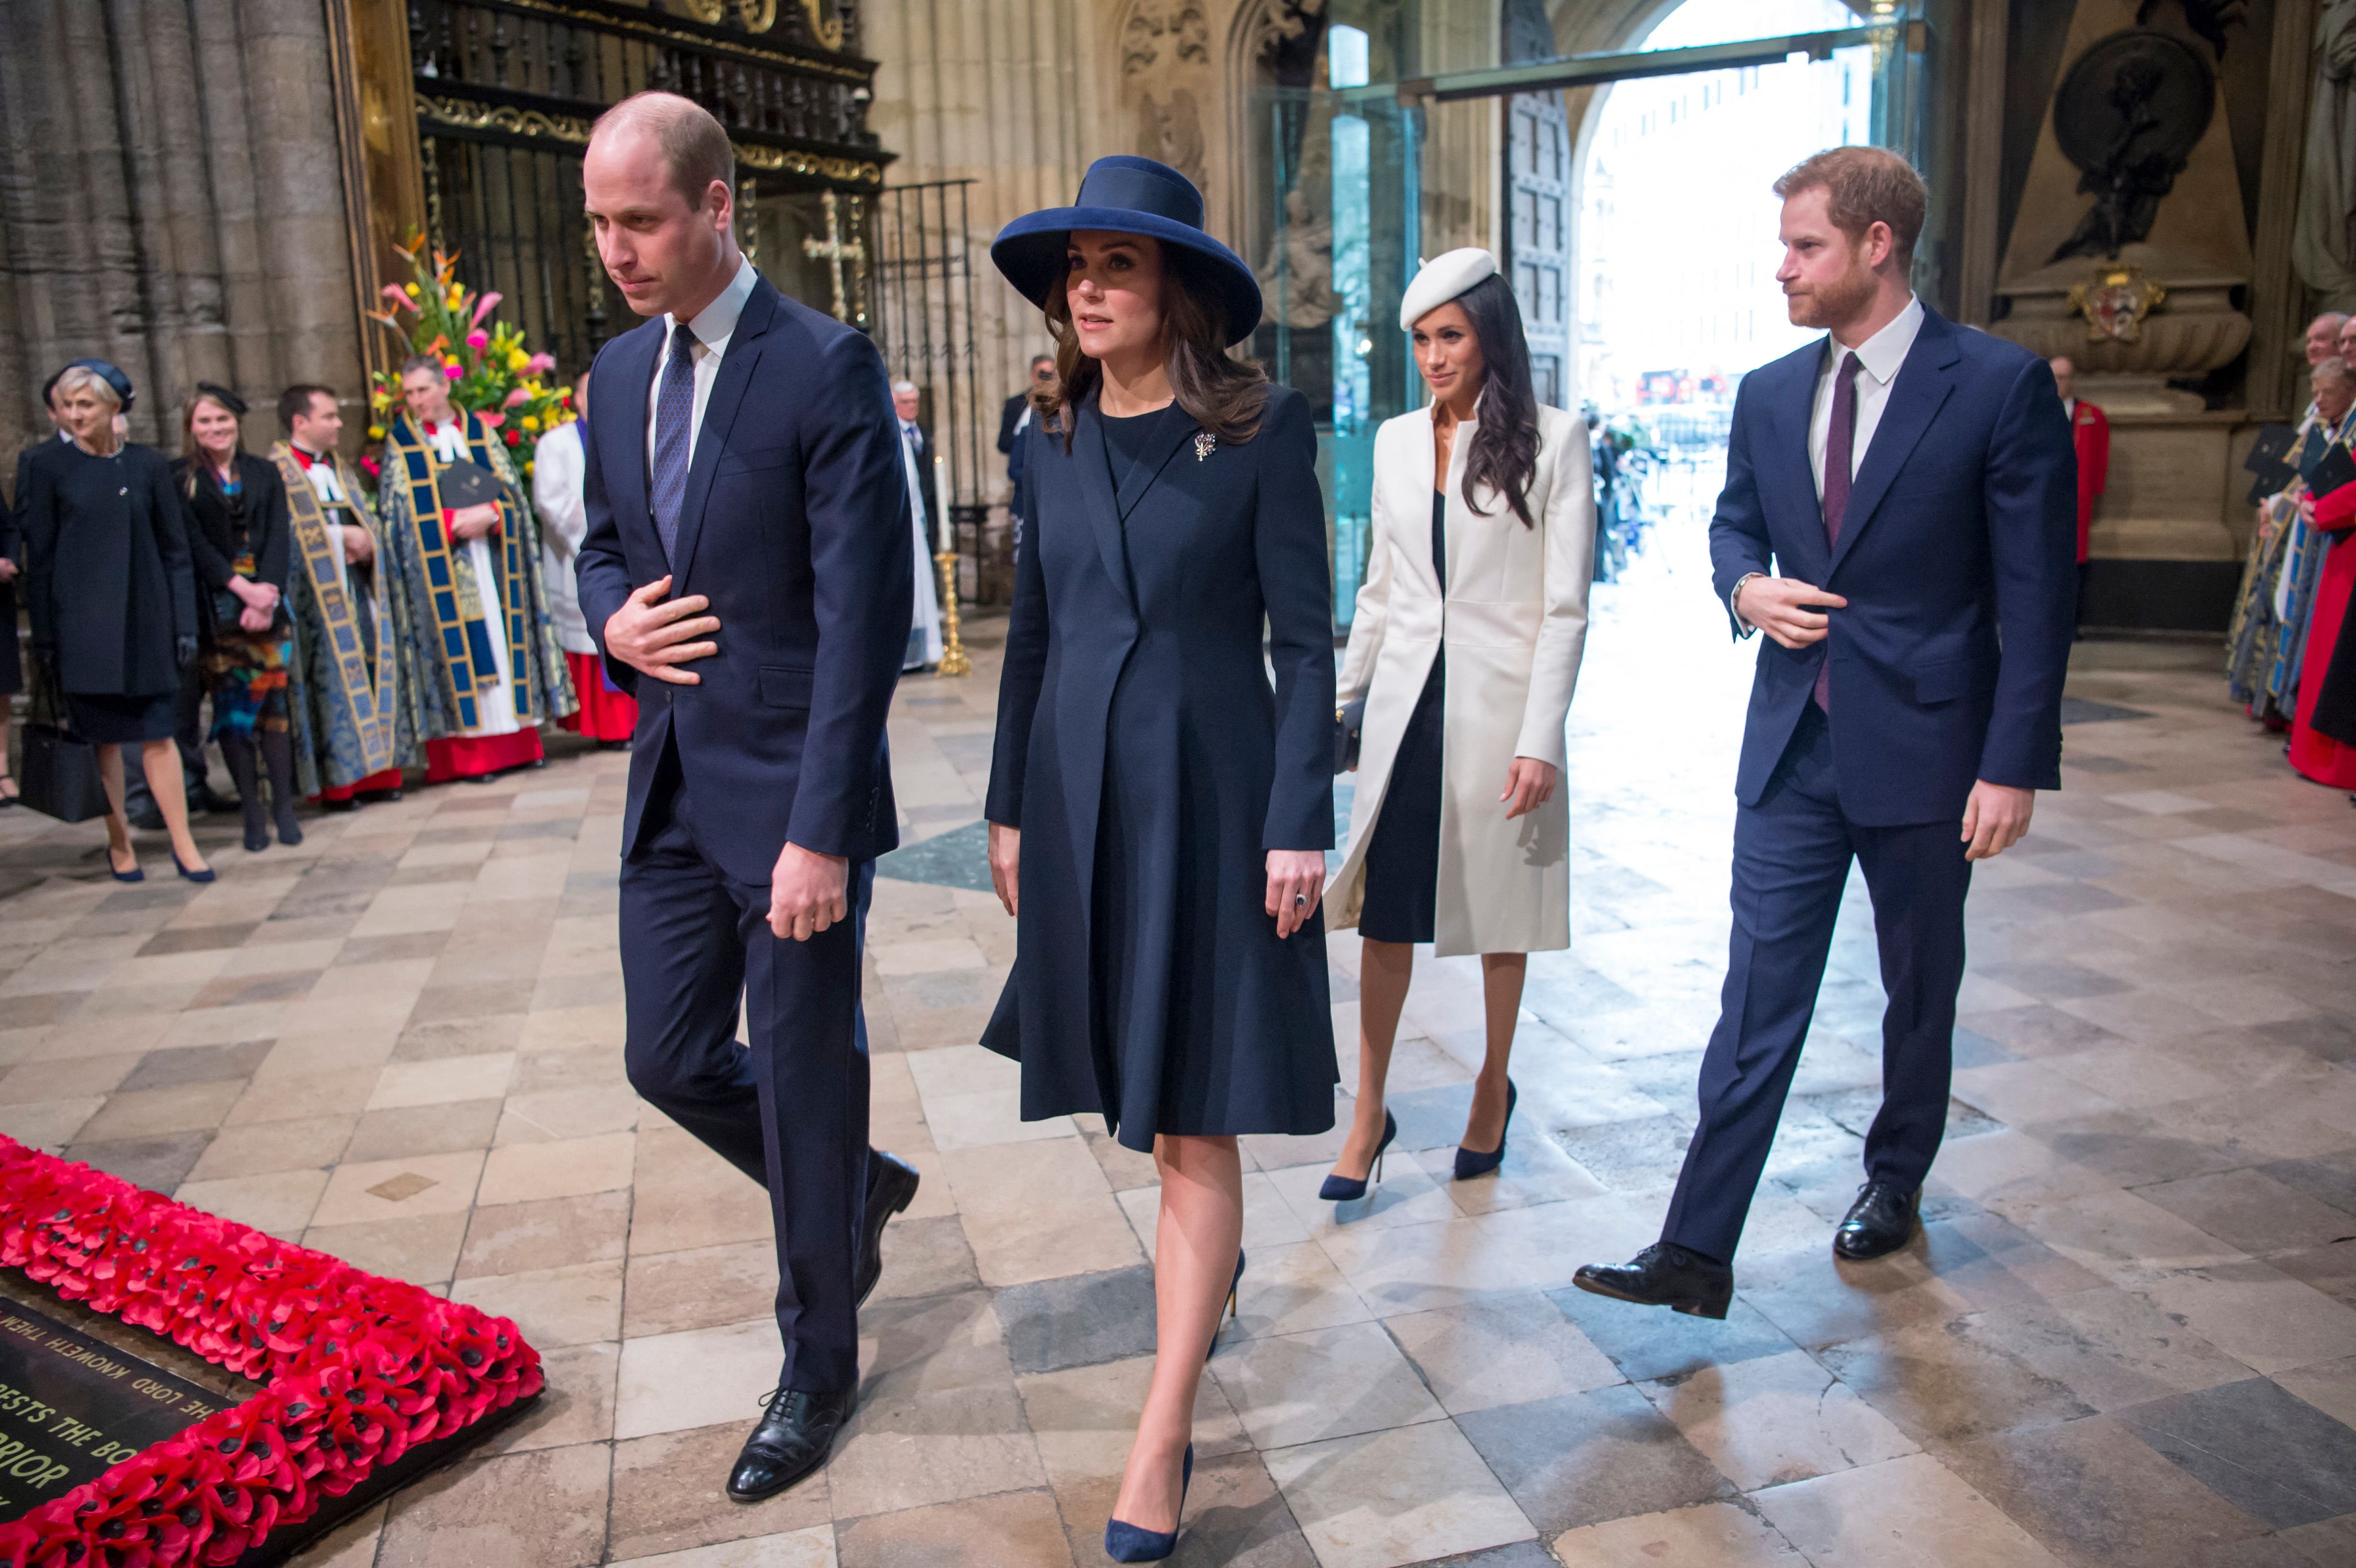 Britain's Prince William, Duke of Cambridge, Britain's Catherine, Duchess of Cambridge, US actress Meghan Markle and her fiancee Britain's Prince Harry attend a Commonwealth Day Service at Westminster Abbey in central London, on March 12, 2018 | Source: Getty Images